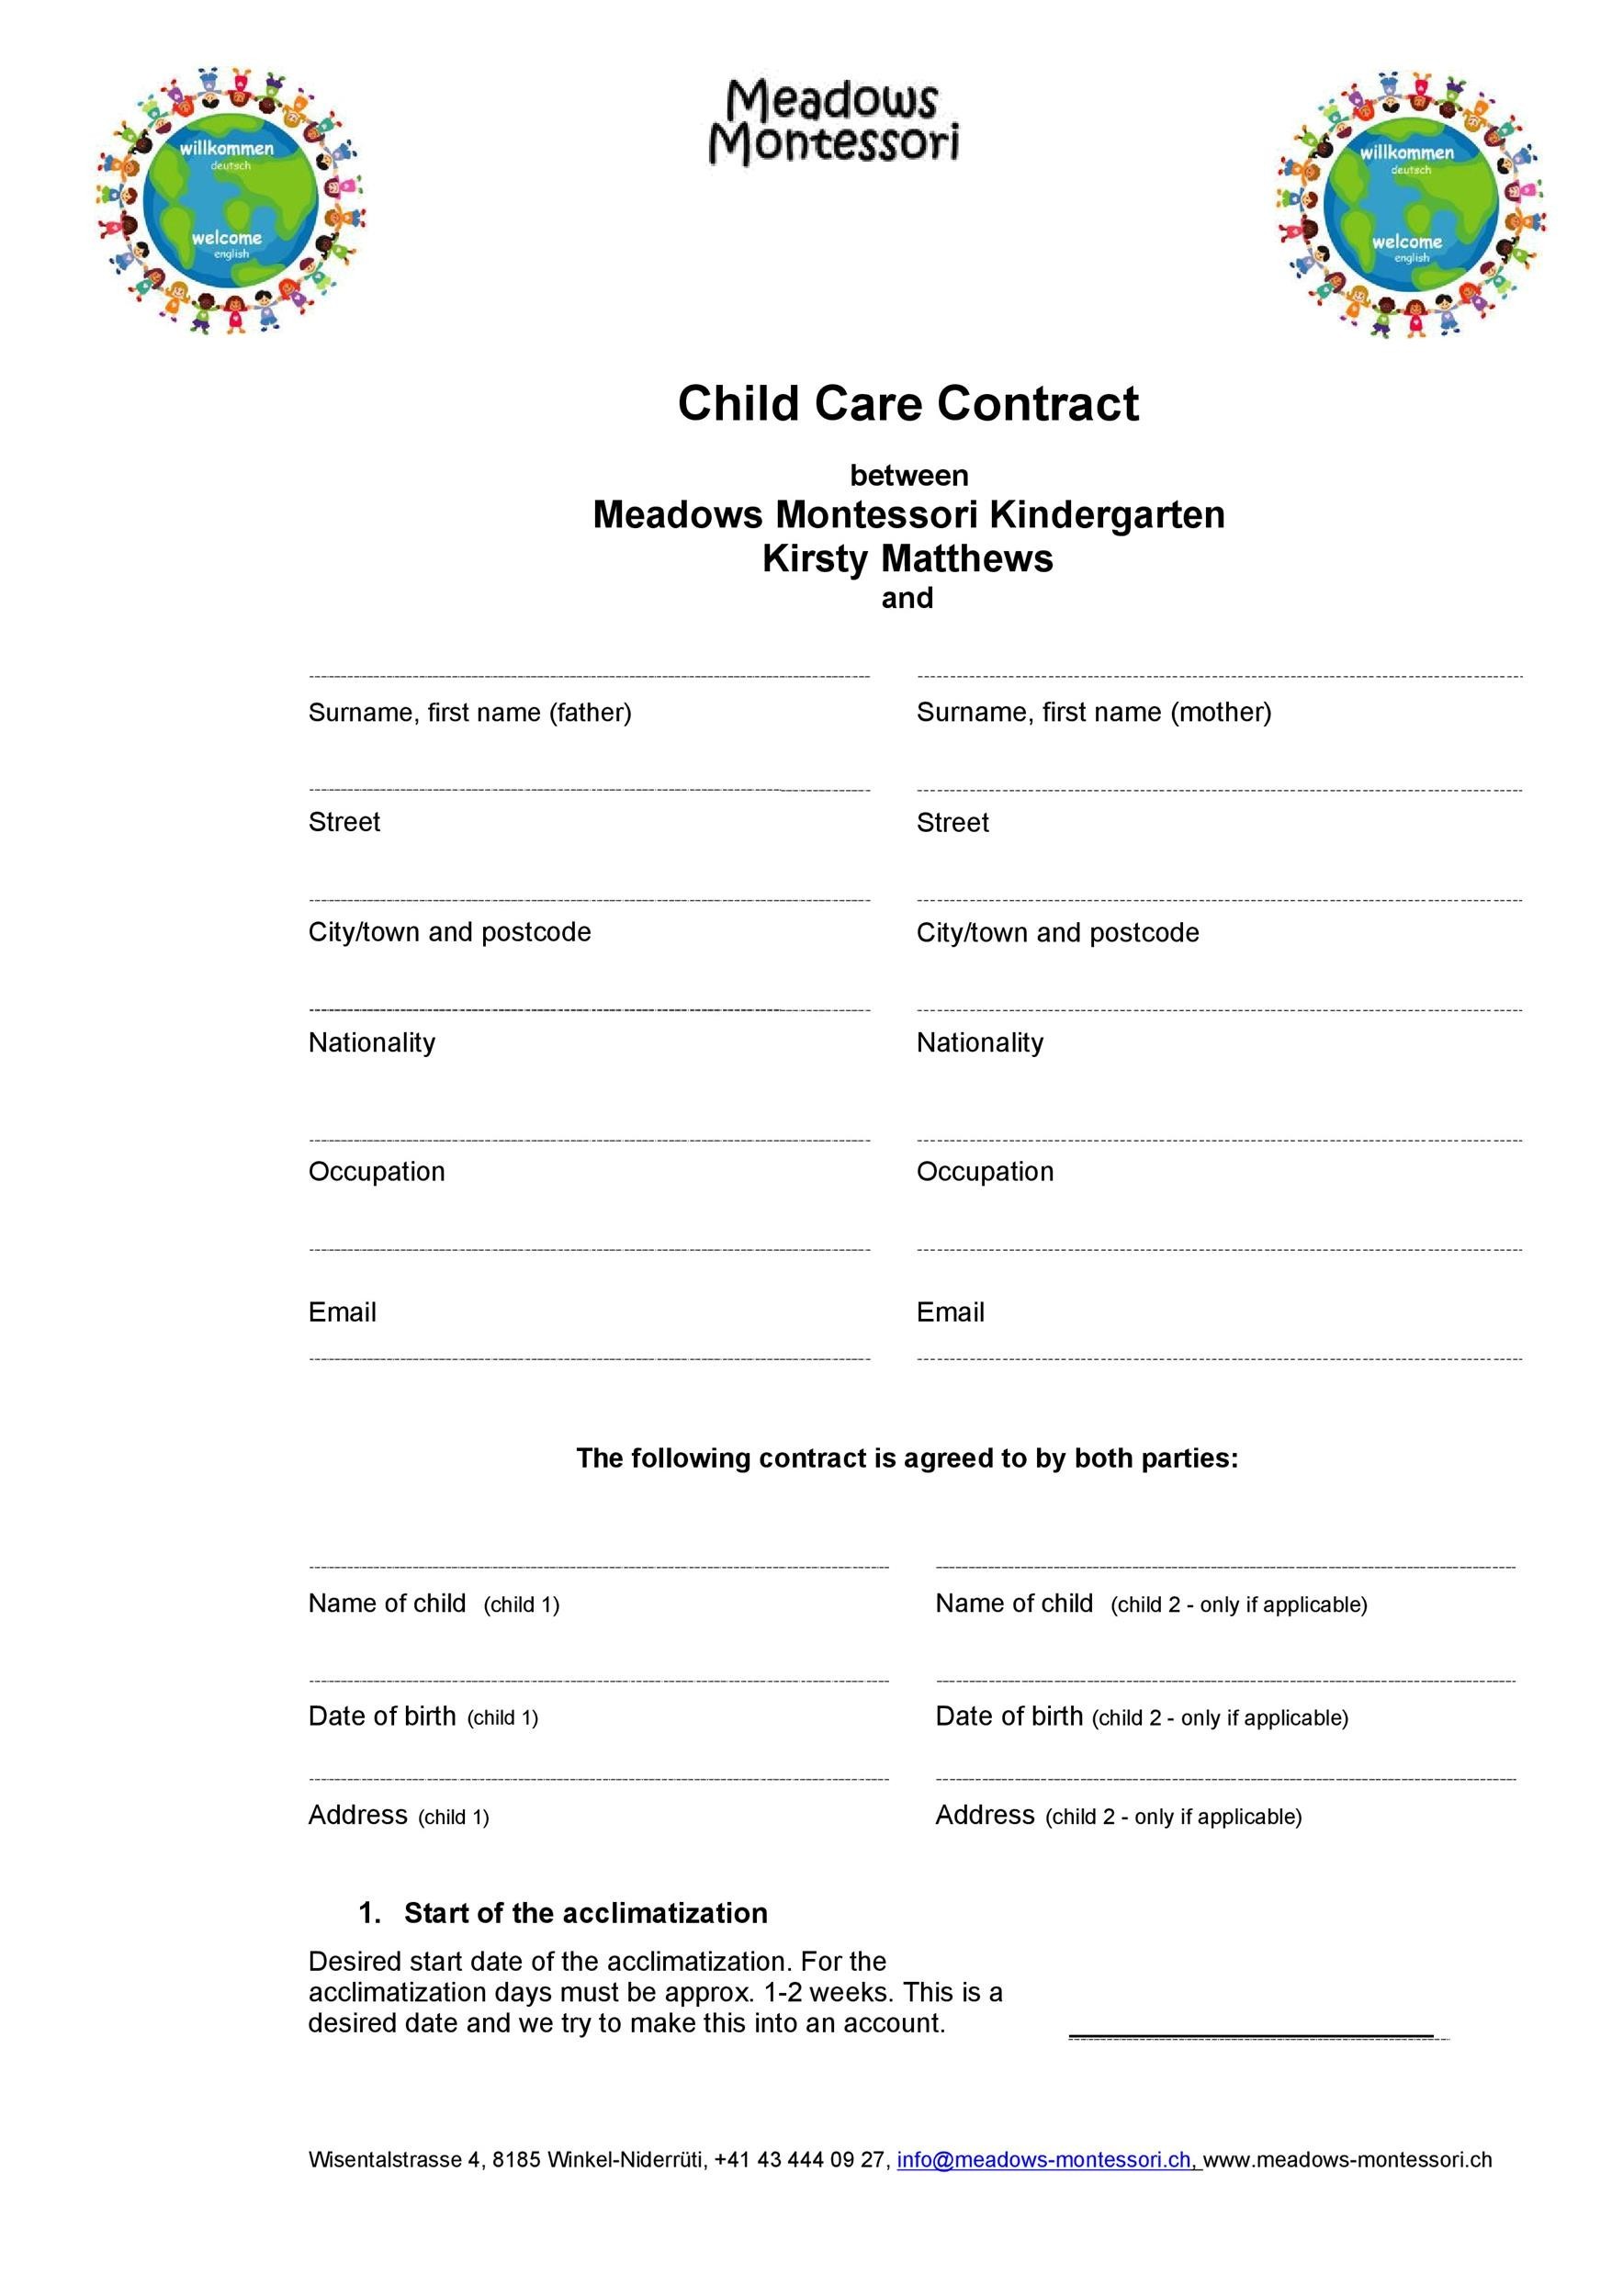 50 Daycare Child Care Babysitting Contract Templates Free ᐅ